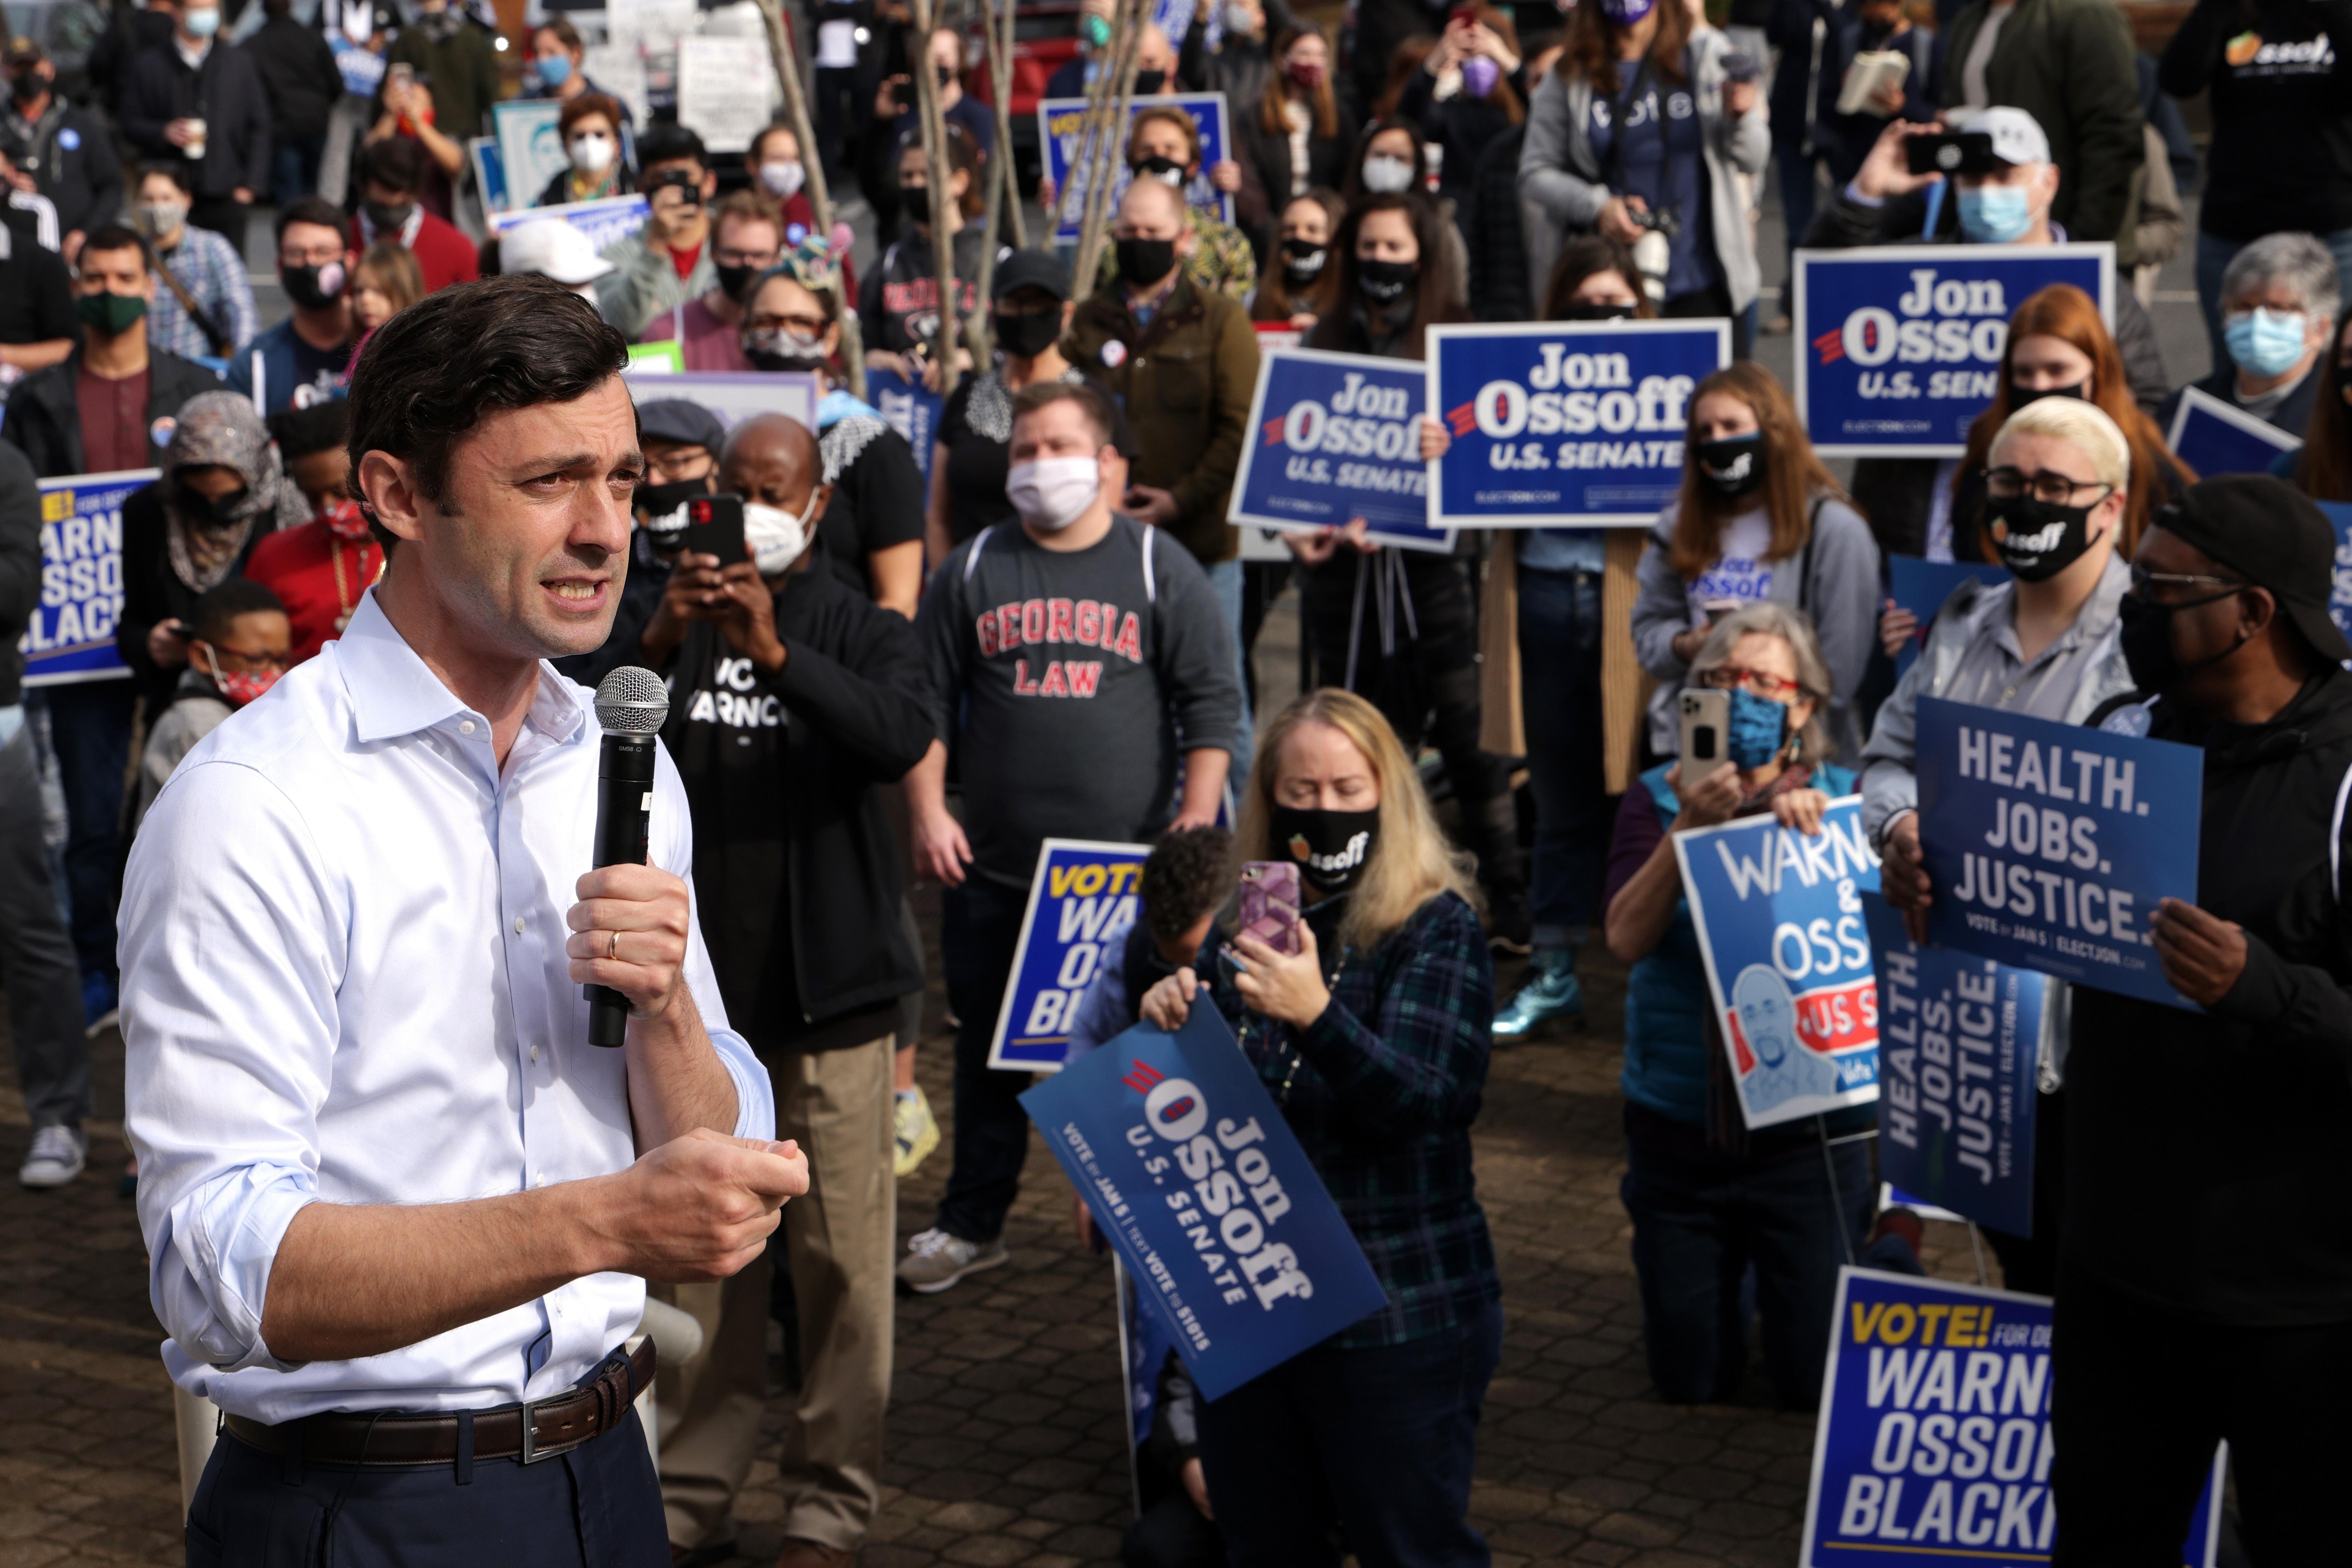 Jon Ossoff speaks to a crowd holding Ossoff and Warnock signs.